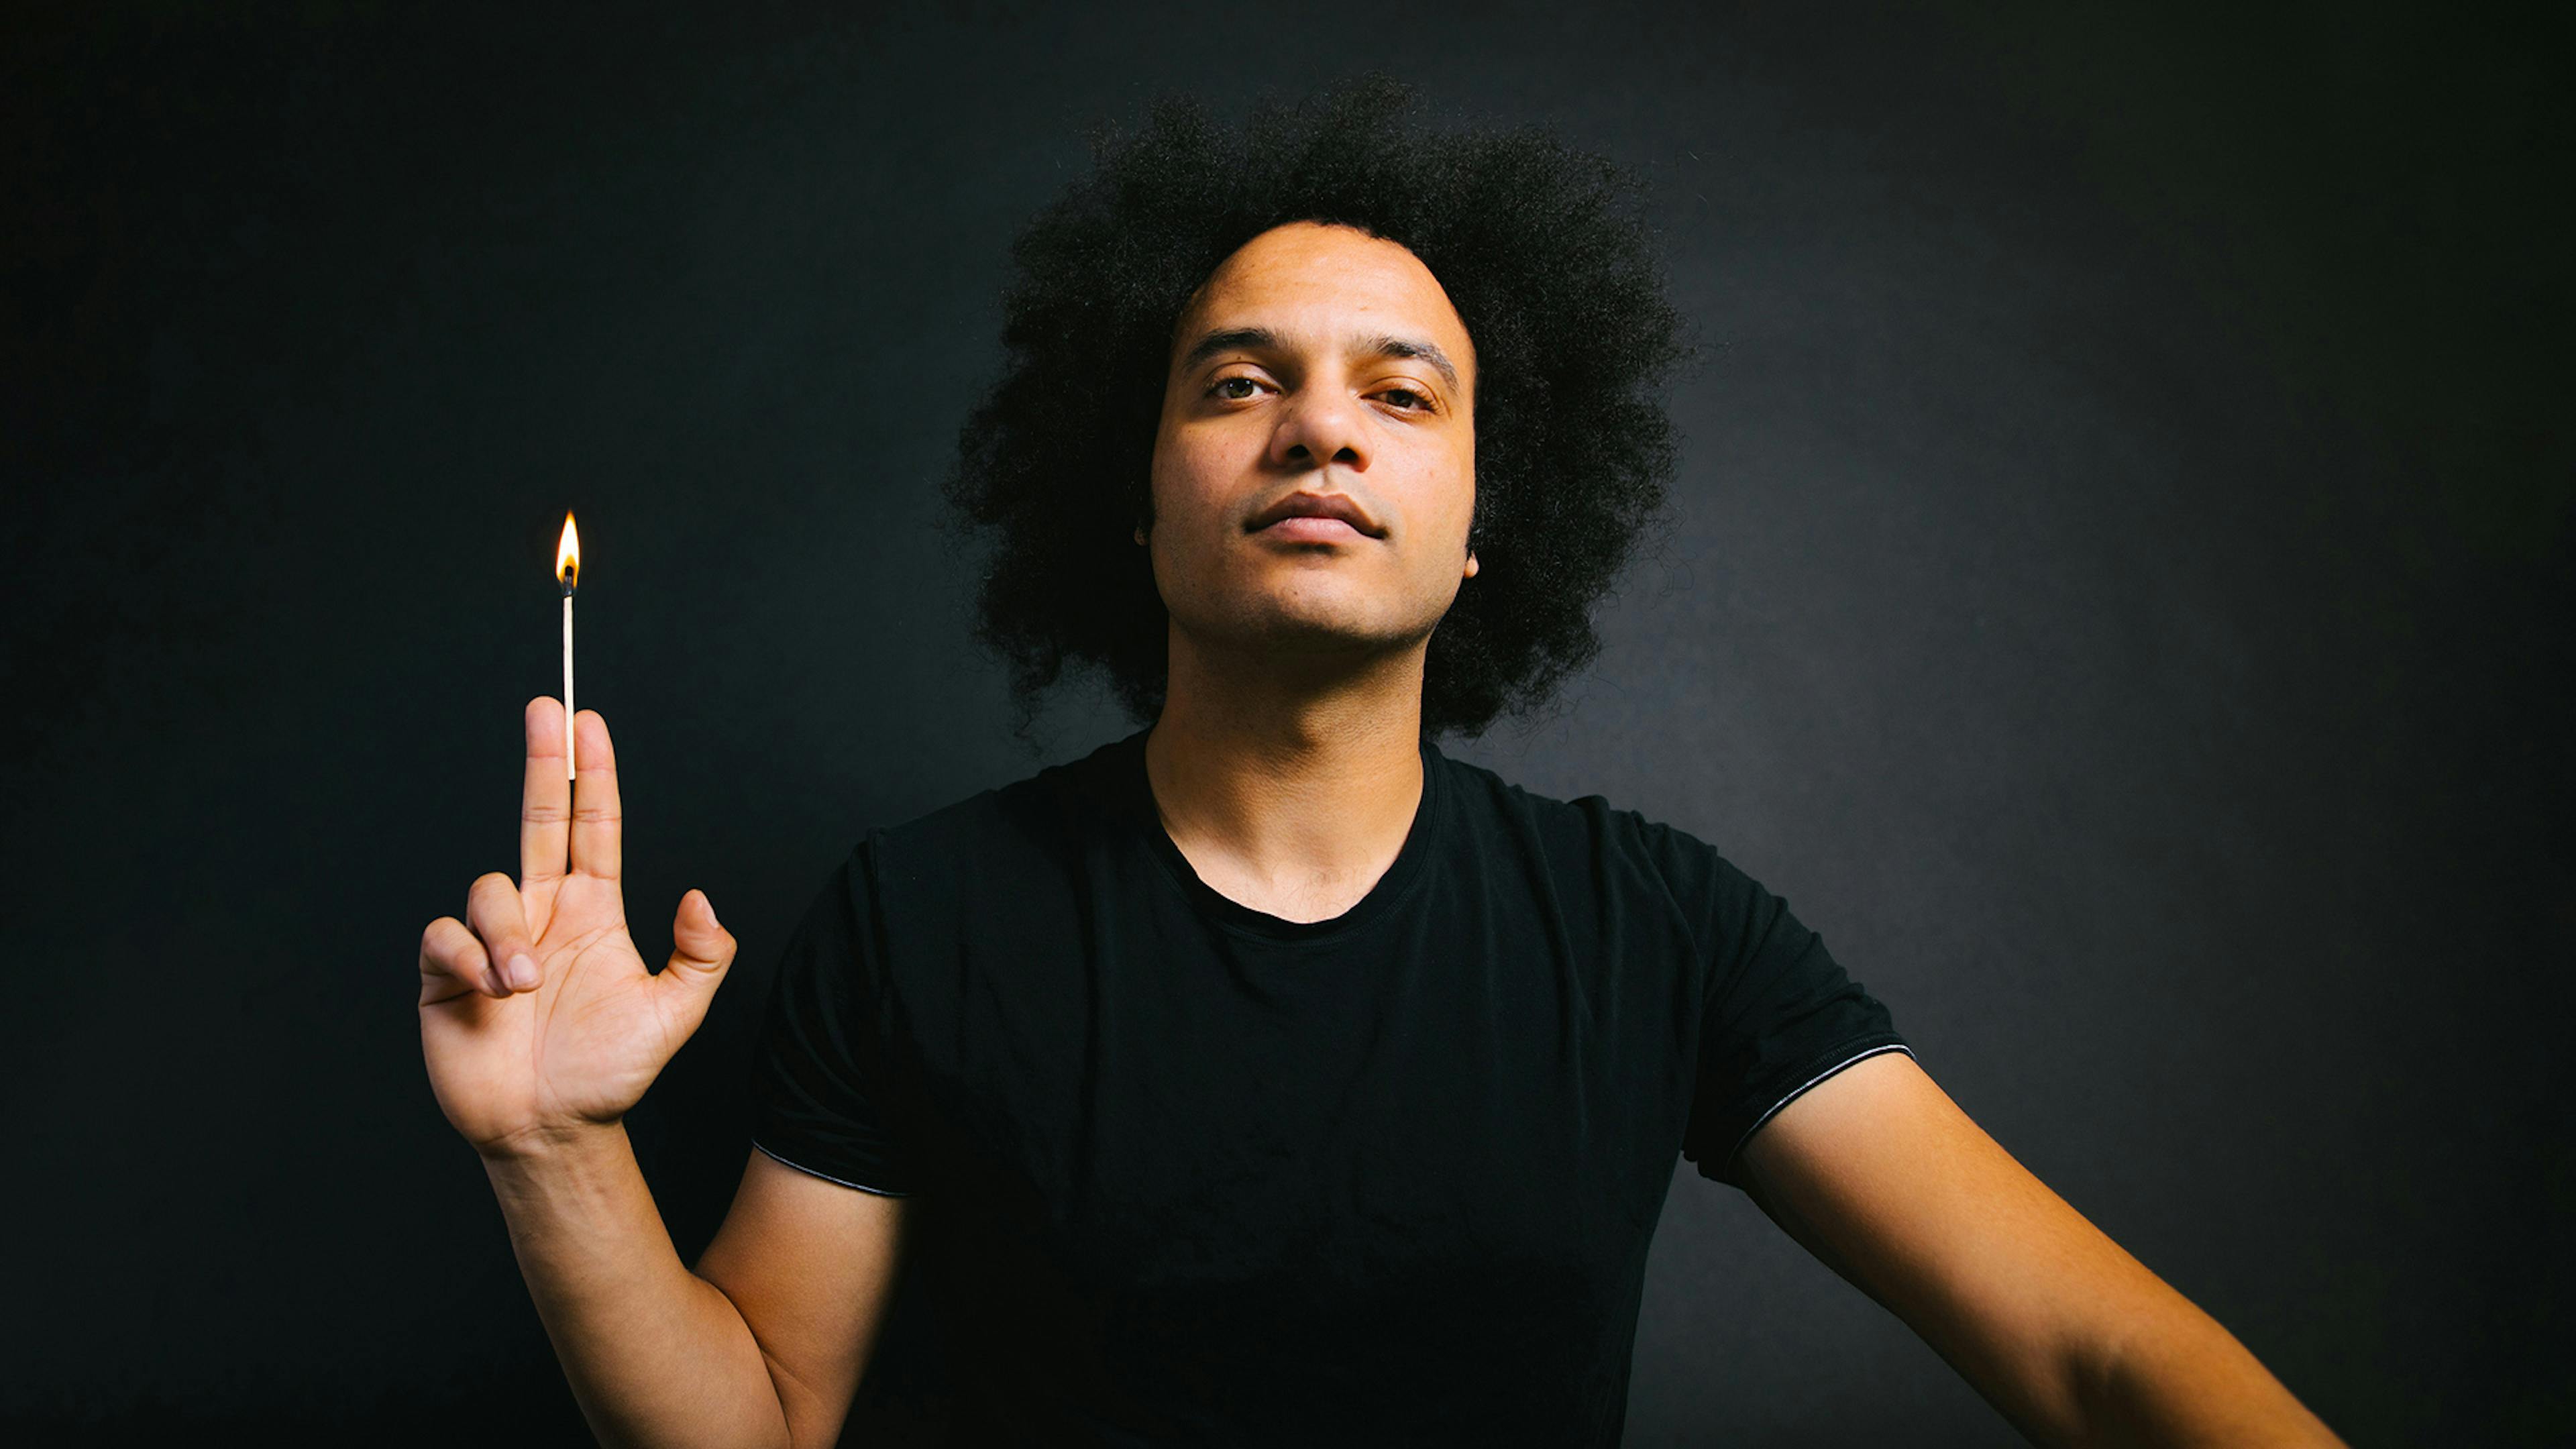 Zeal & Ardor: “I just want to take people by surprise”